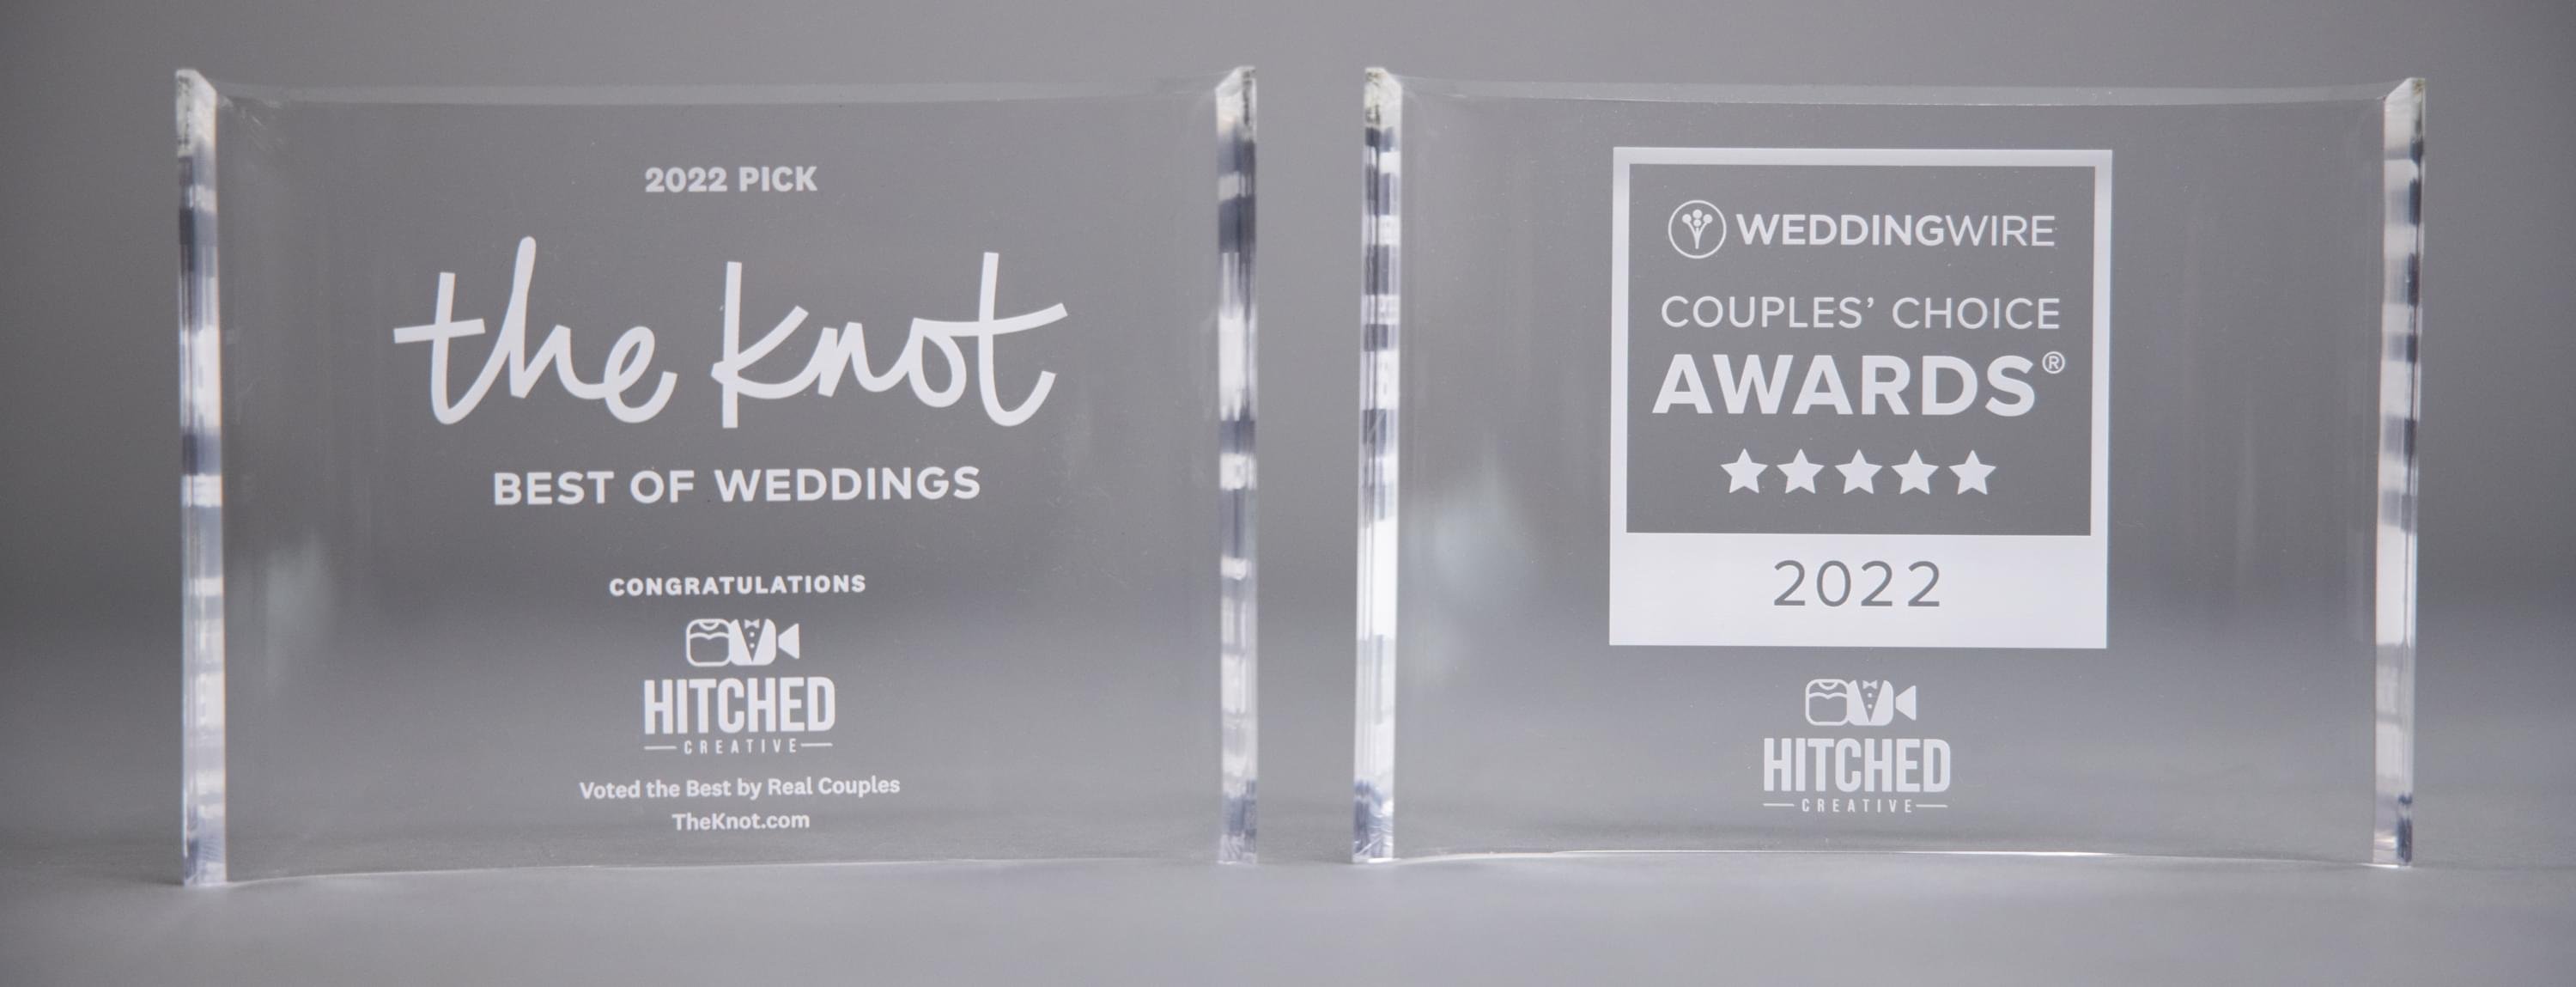 Hitched Creative Wedding Wire Couples' Choice Awards